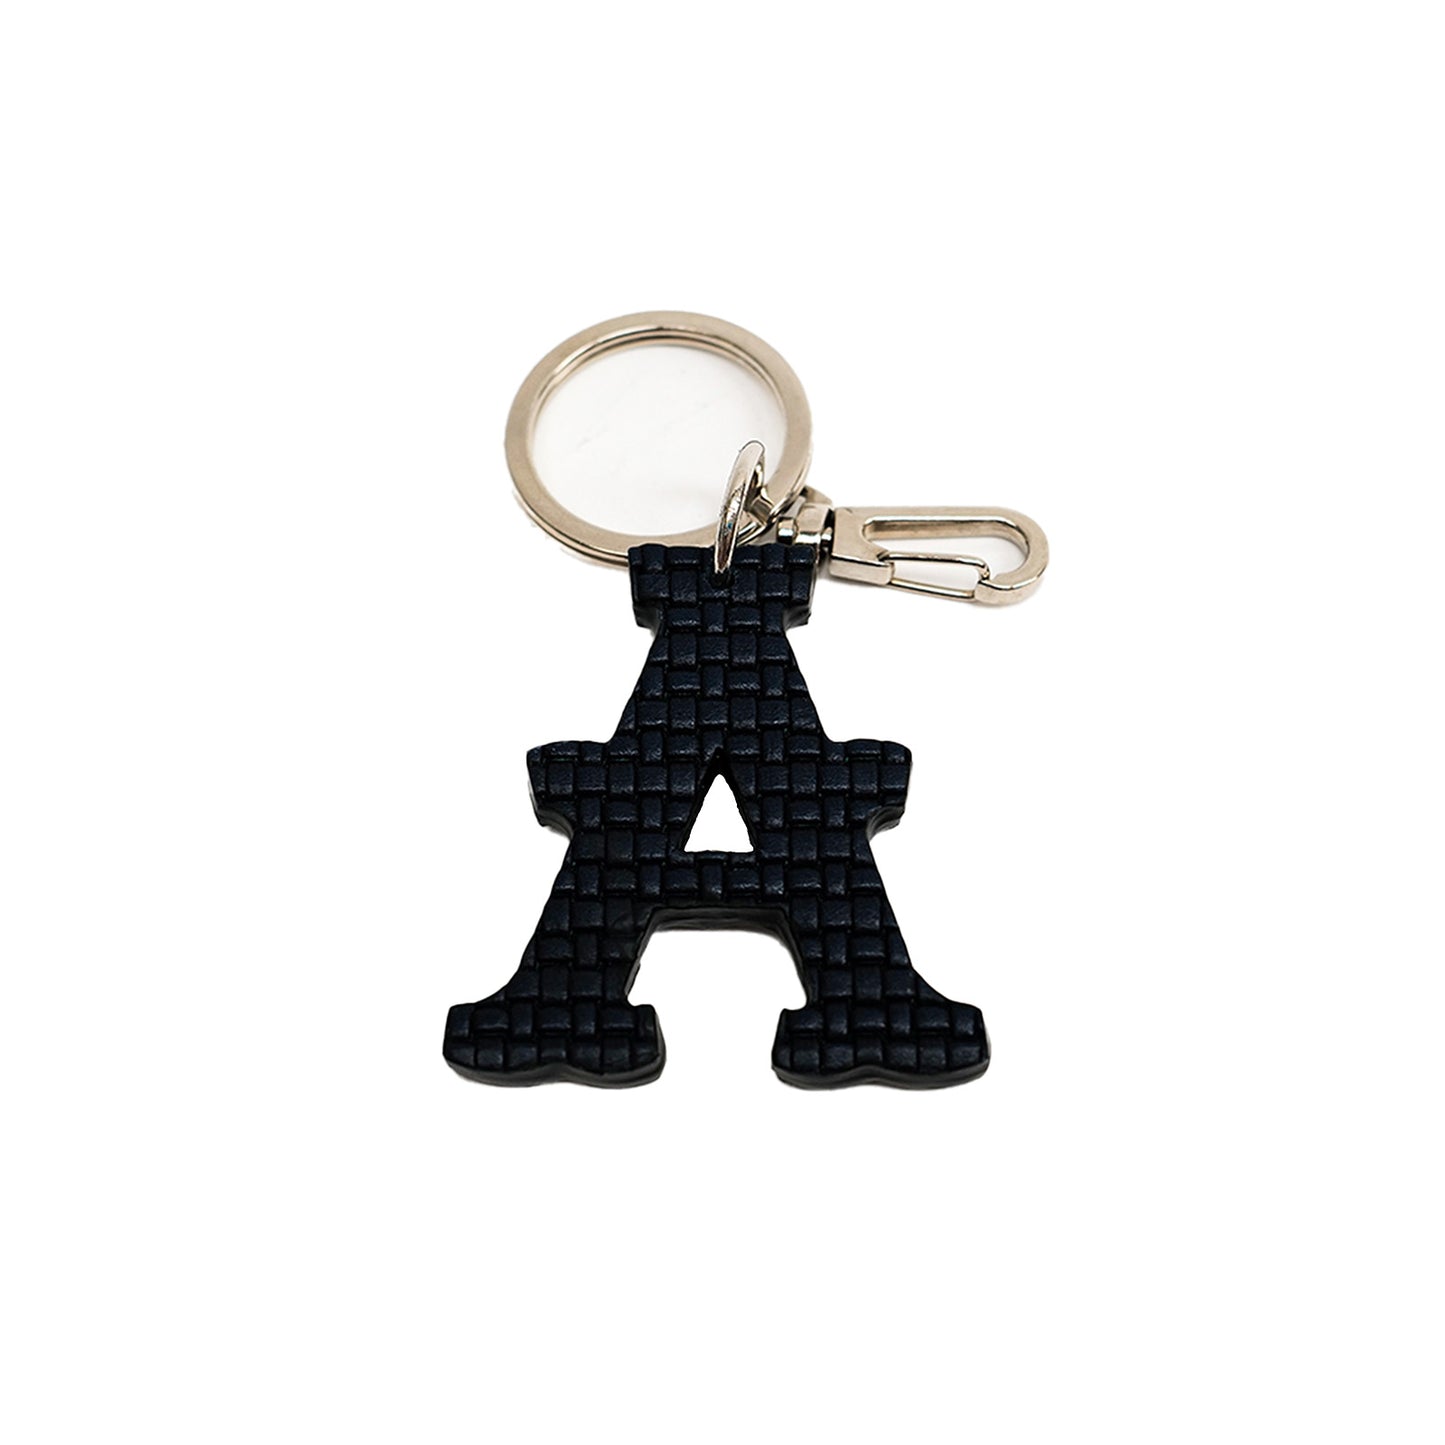 The Signature Initial A Key Ring